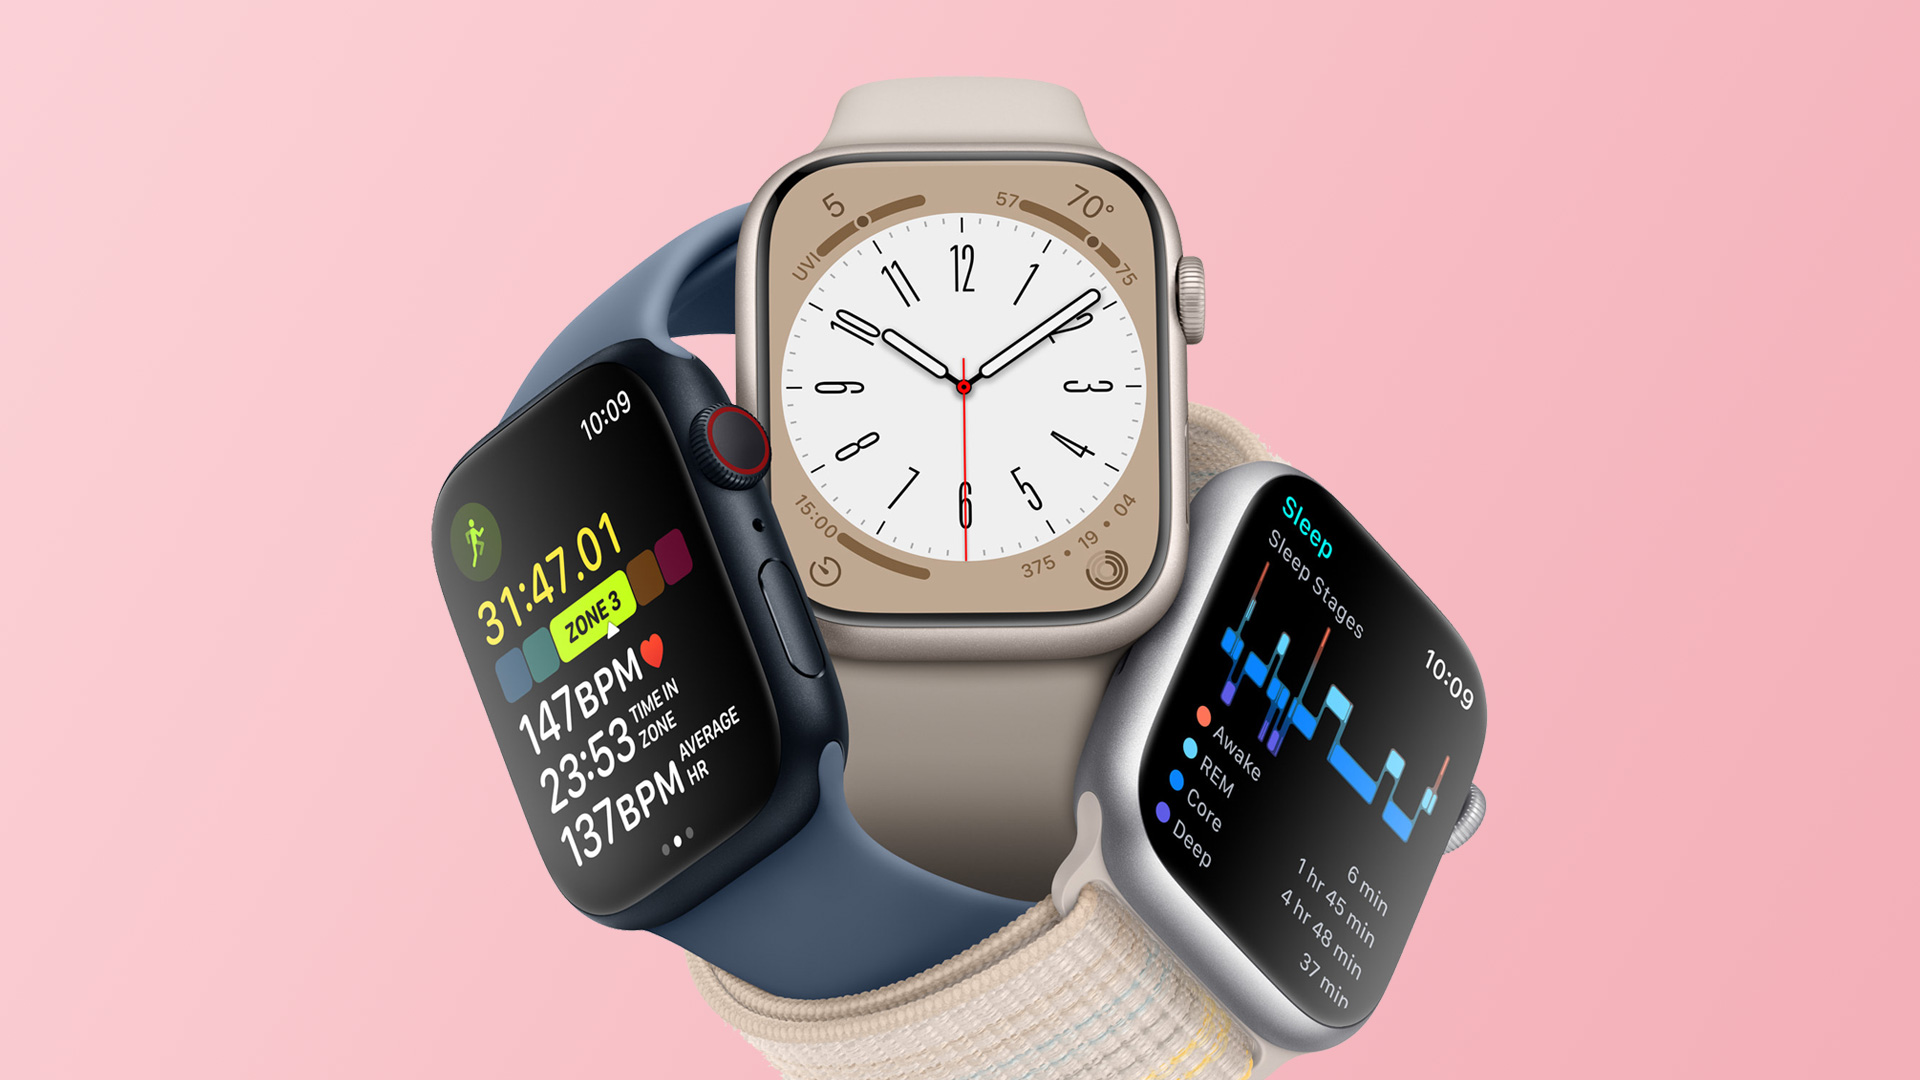 Future Apple Watch bands could automatically launch apps or change face |  AppleInsider